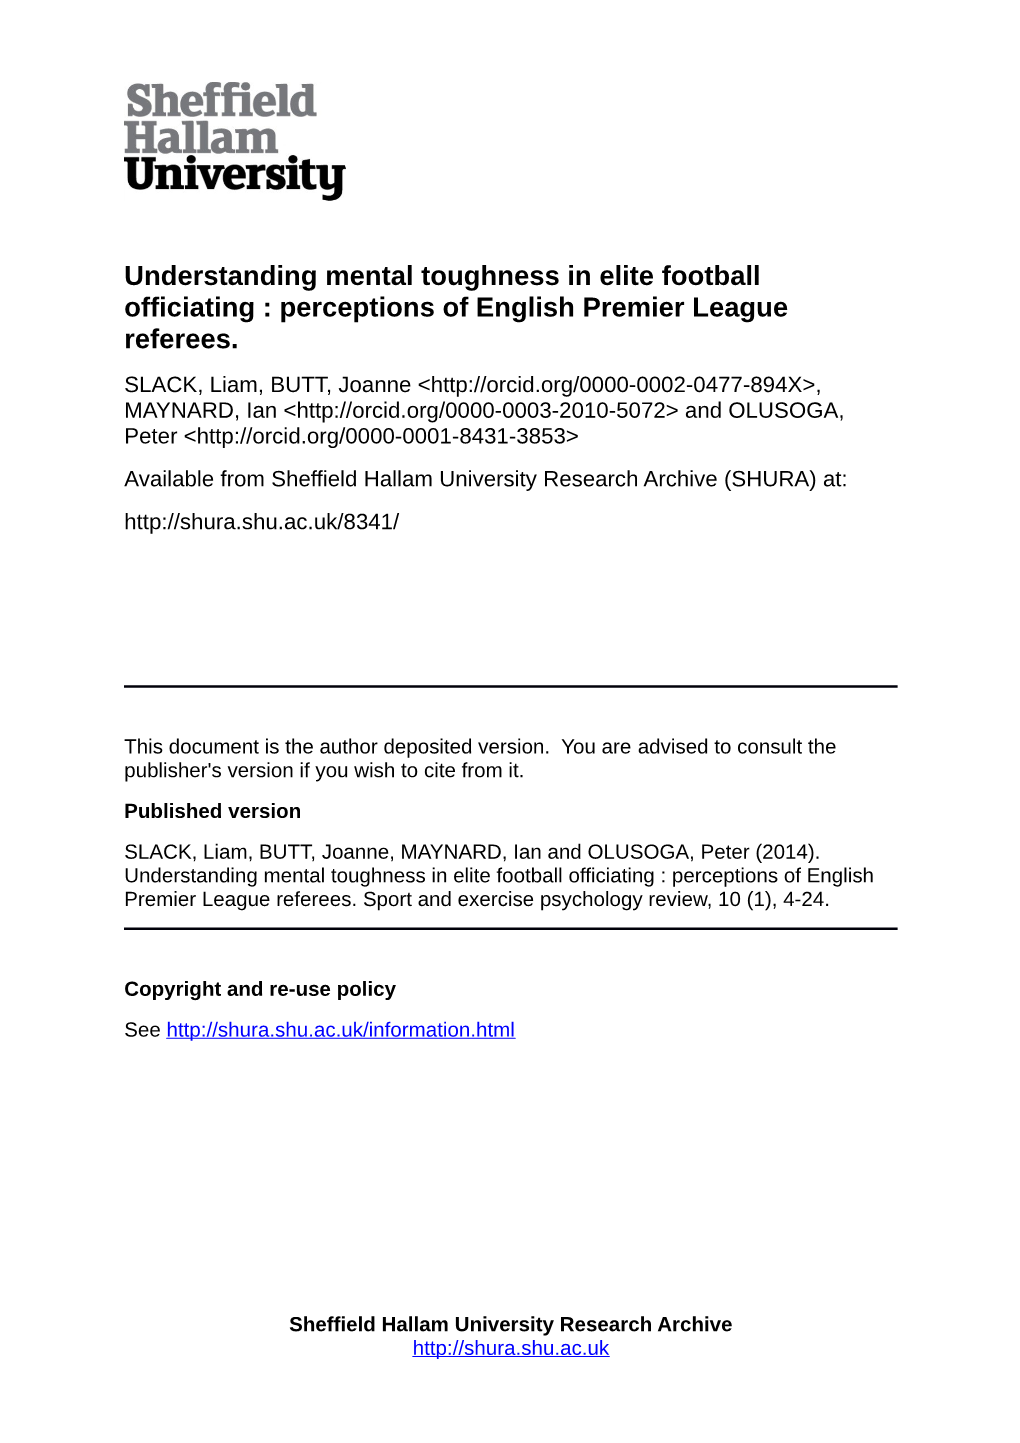 Understanding Mental Toughness in Elite Football Officiating : Perceptions of English Premier League Referees